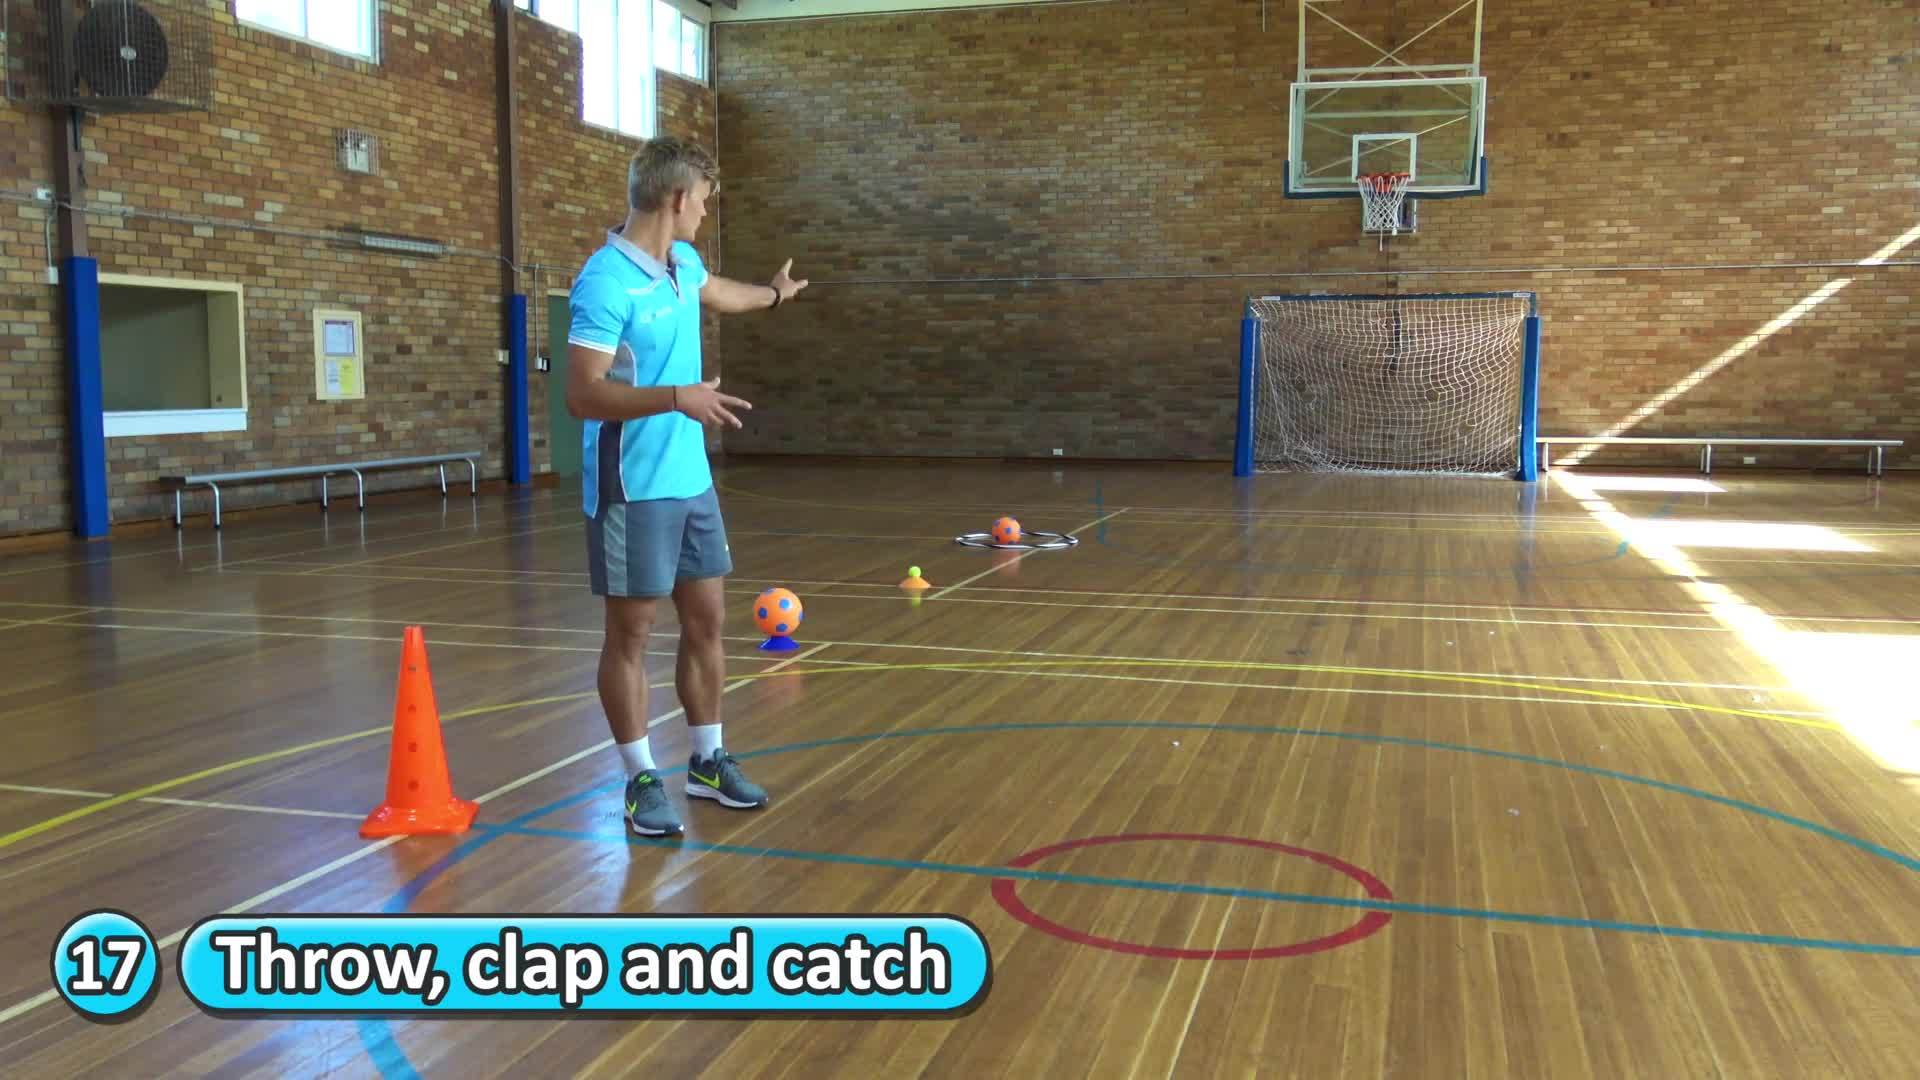 Relay race: Catching › Throw, clap and catch | Teaching fundamentals of PE (K-3)